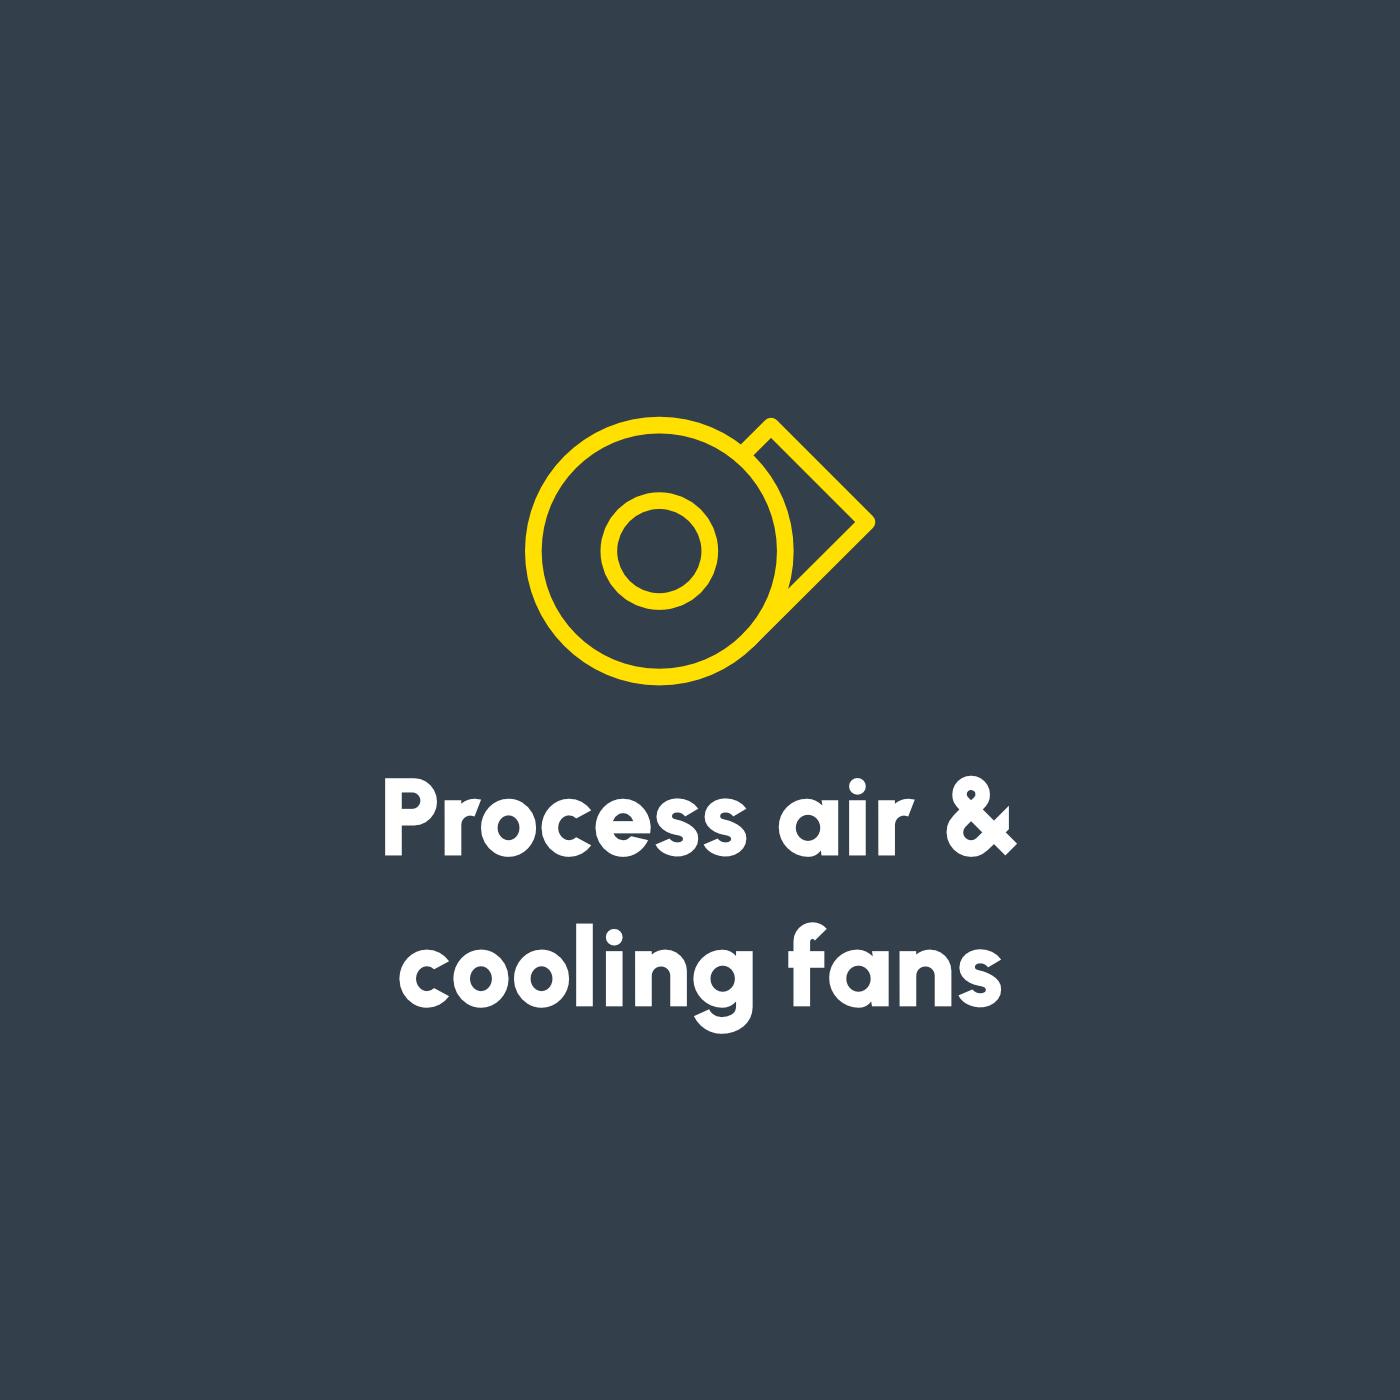 Image for Process air & cooling fans